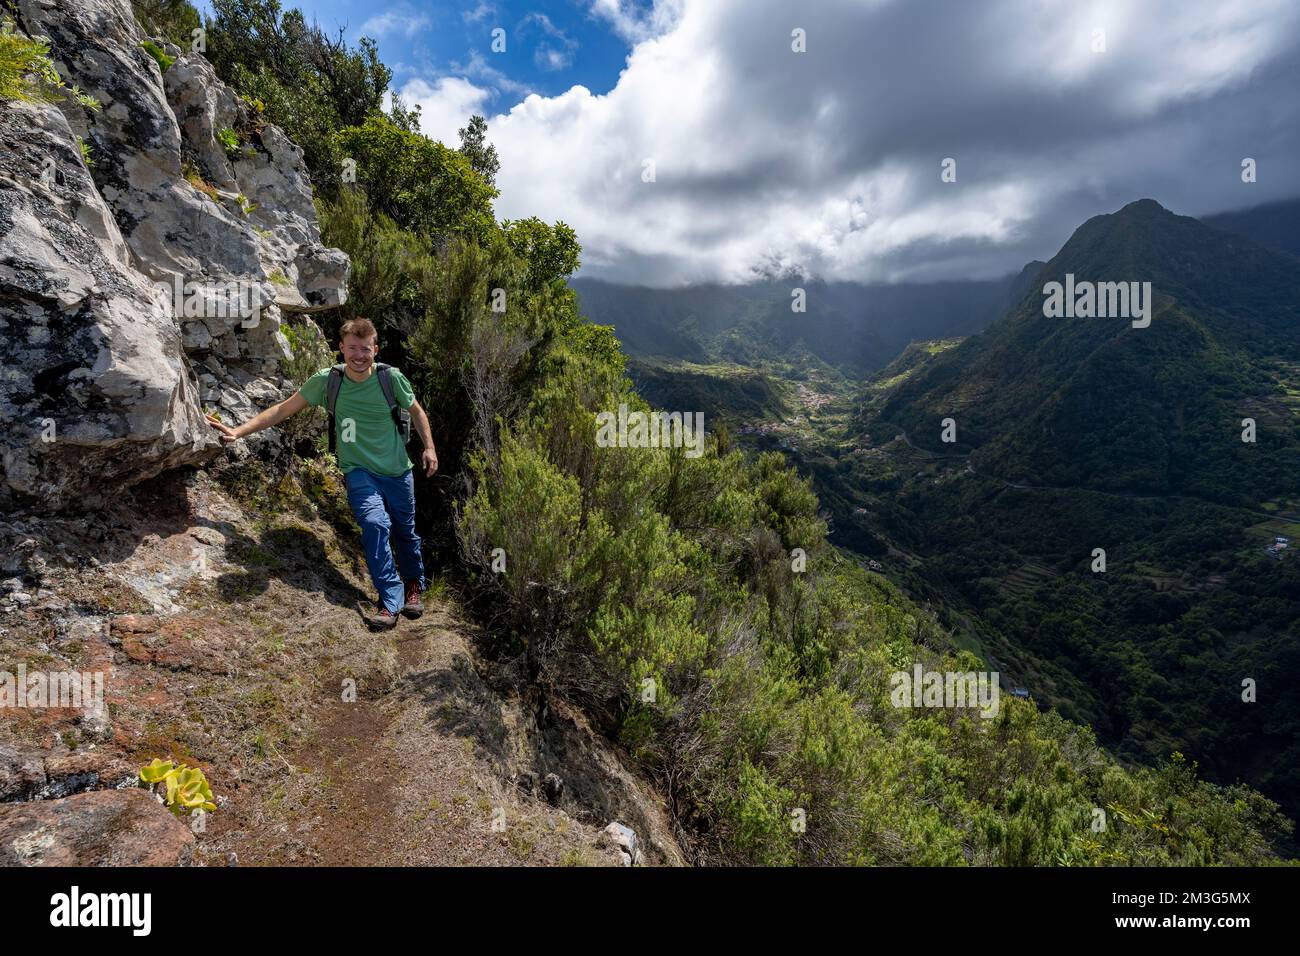 Hikers at Pico do Alto, panorama, view of densely overgrown cloud-covered mountains and the village of Boaventura, Madeira, Portugal Stock Photo